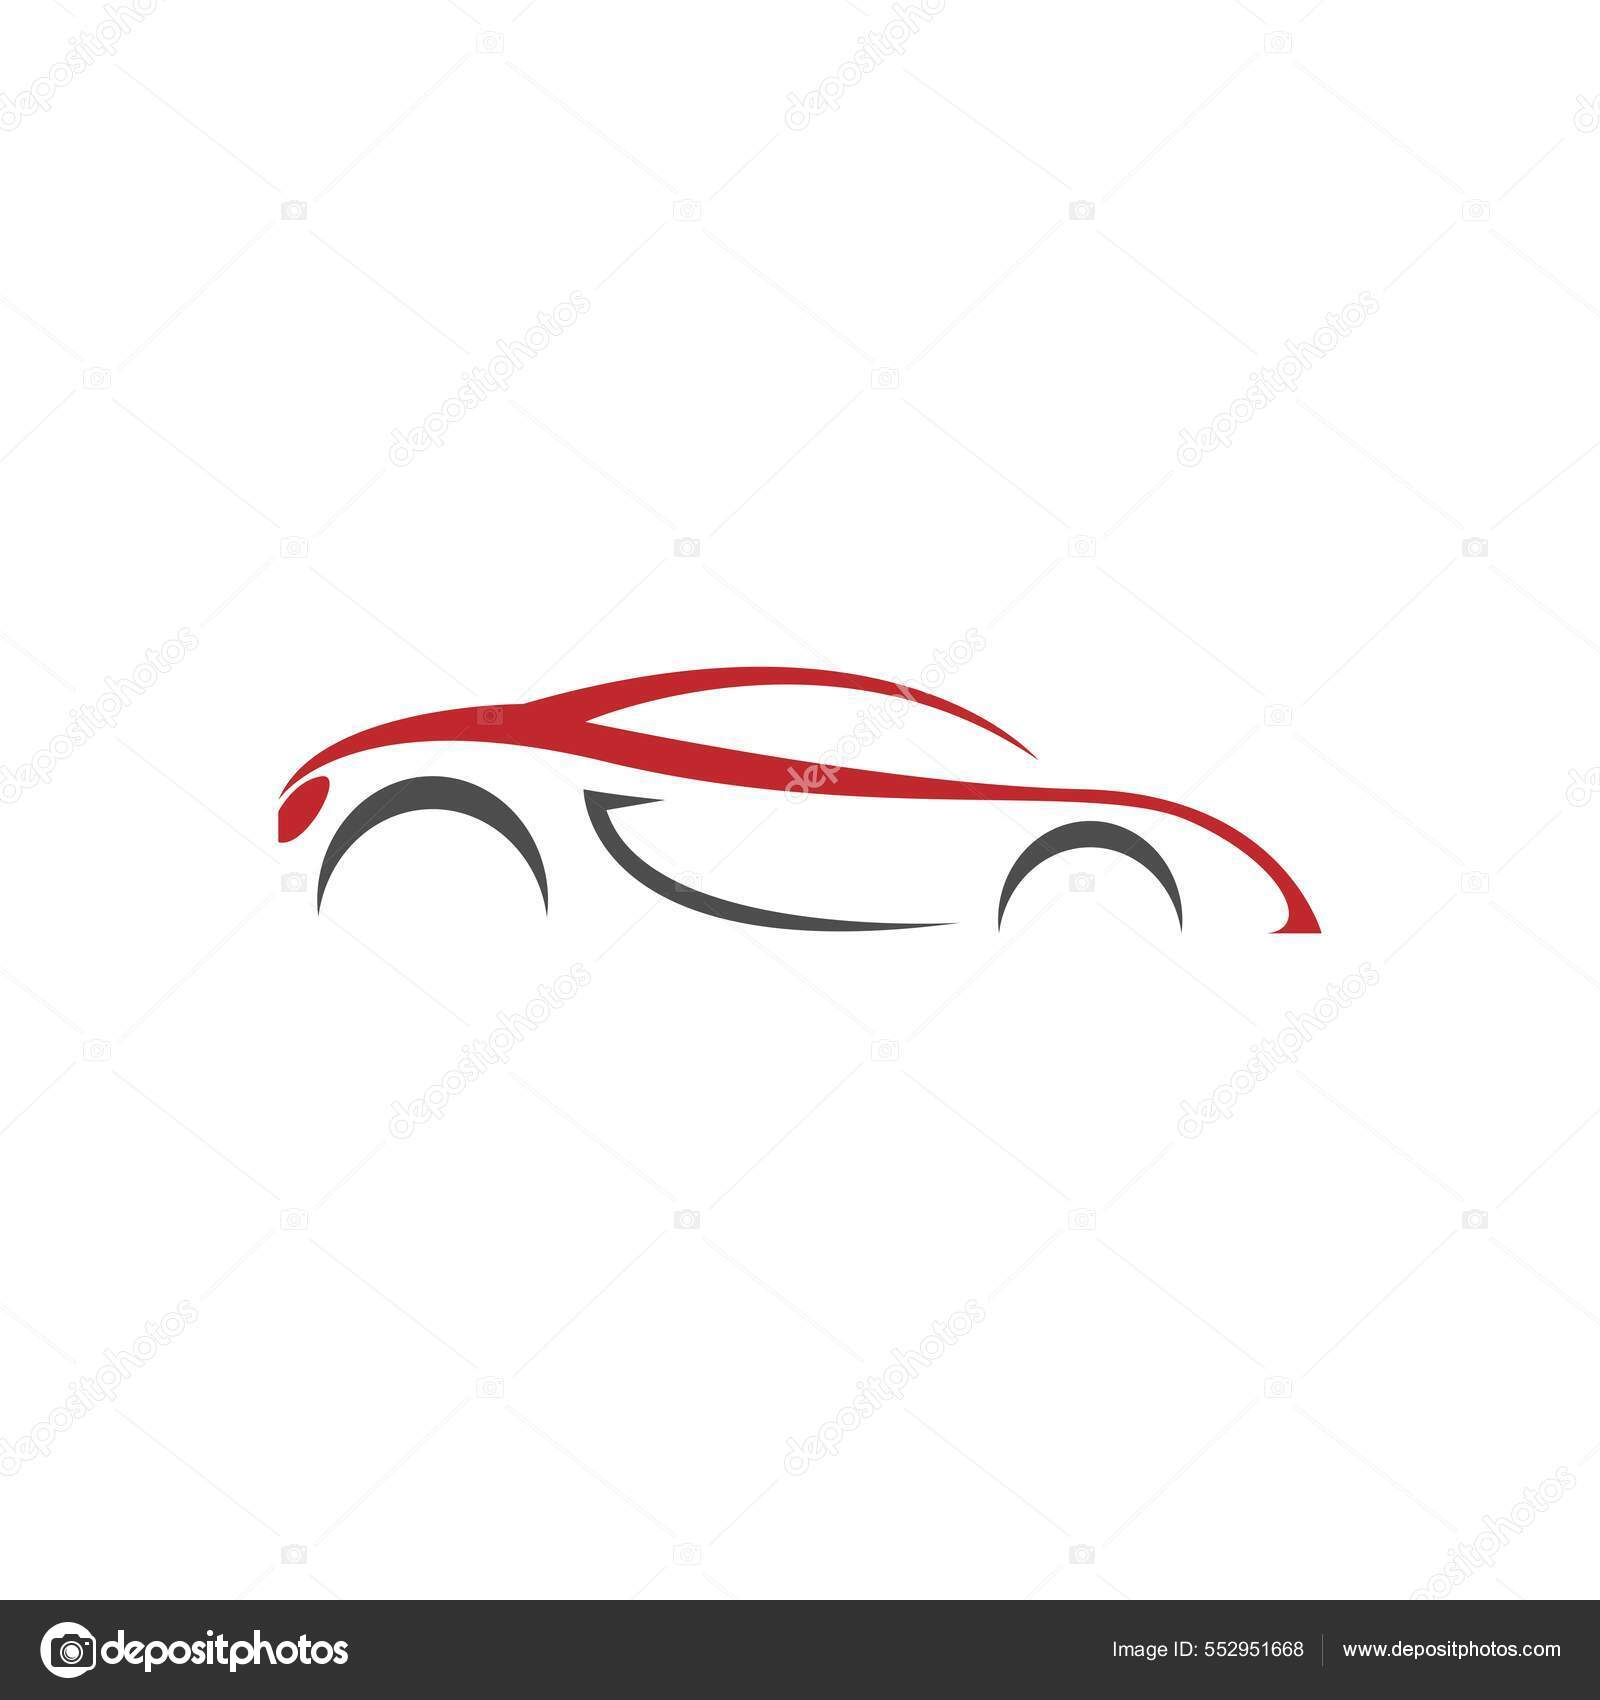 Template For Designing Vector Auto Logos And Symbols Of Cars Vector, Fast,  Transport, Shape PNG and Vector with Transparent Background for Free  Download